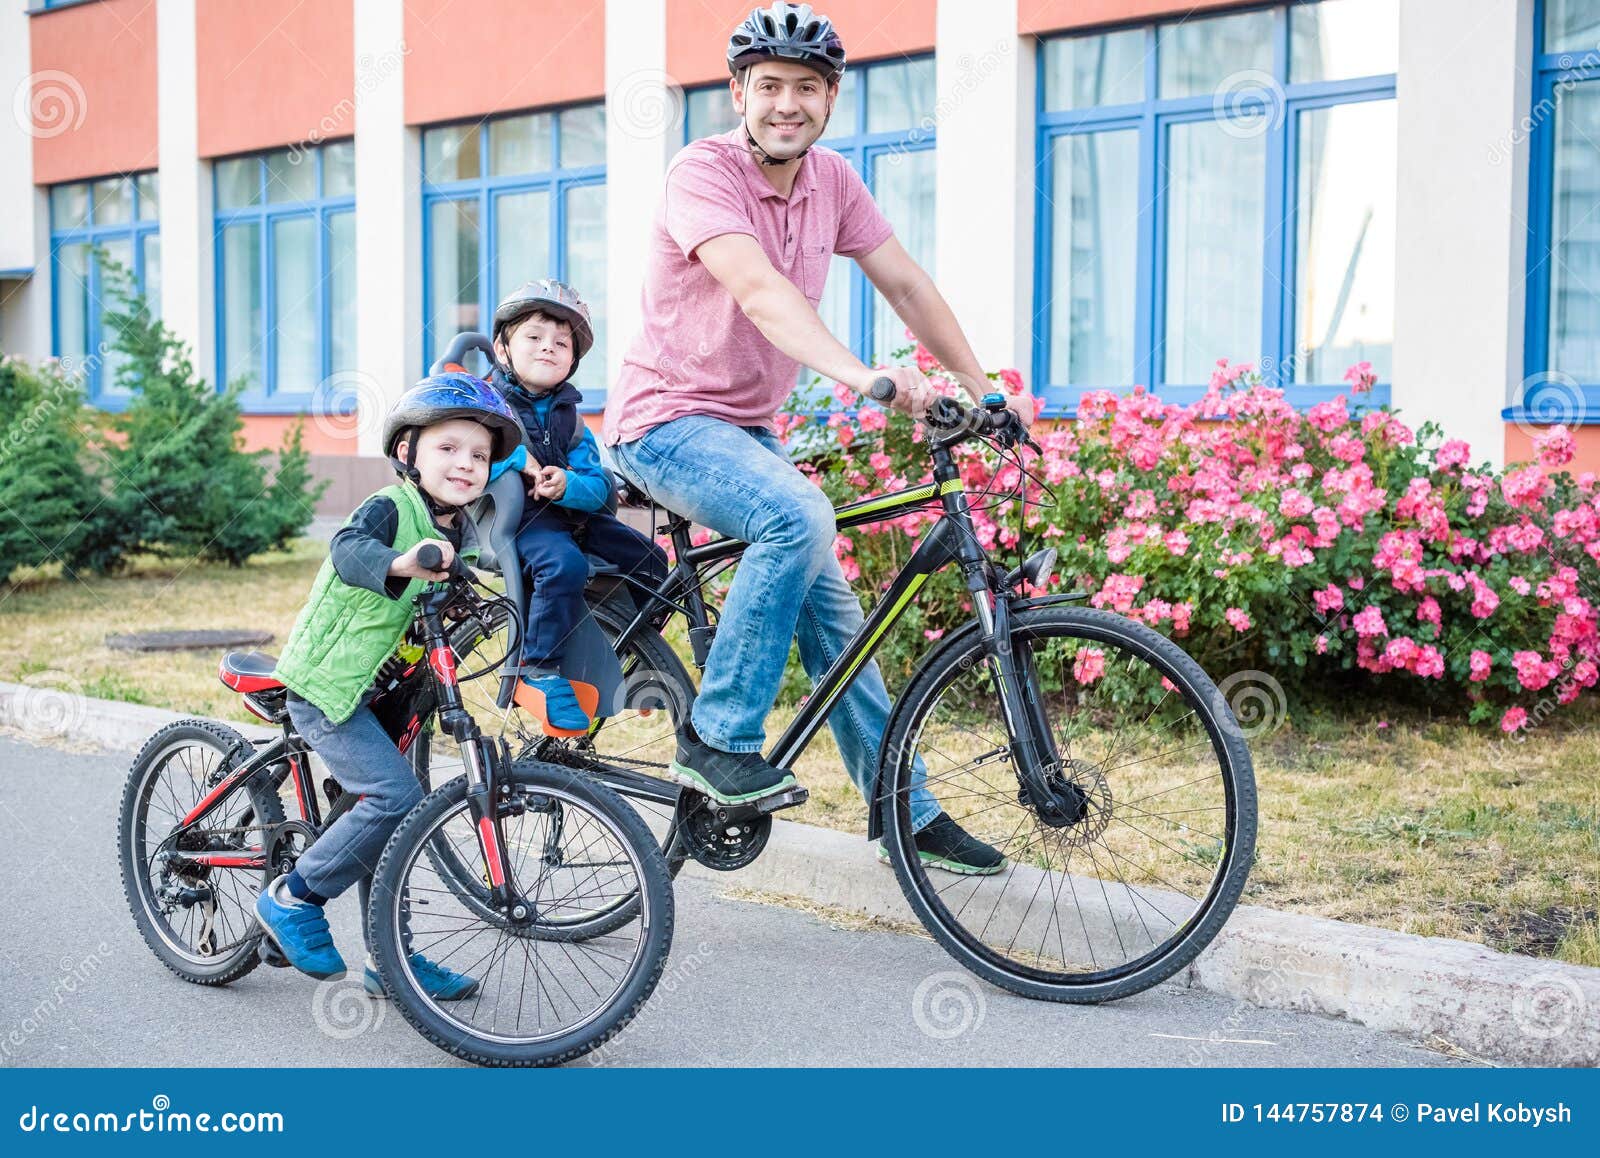 best family bicycle